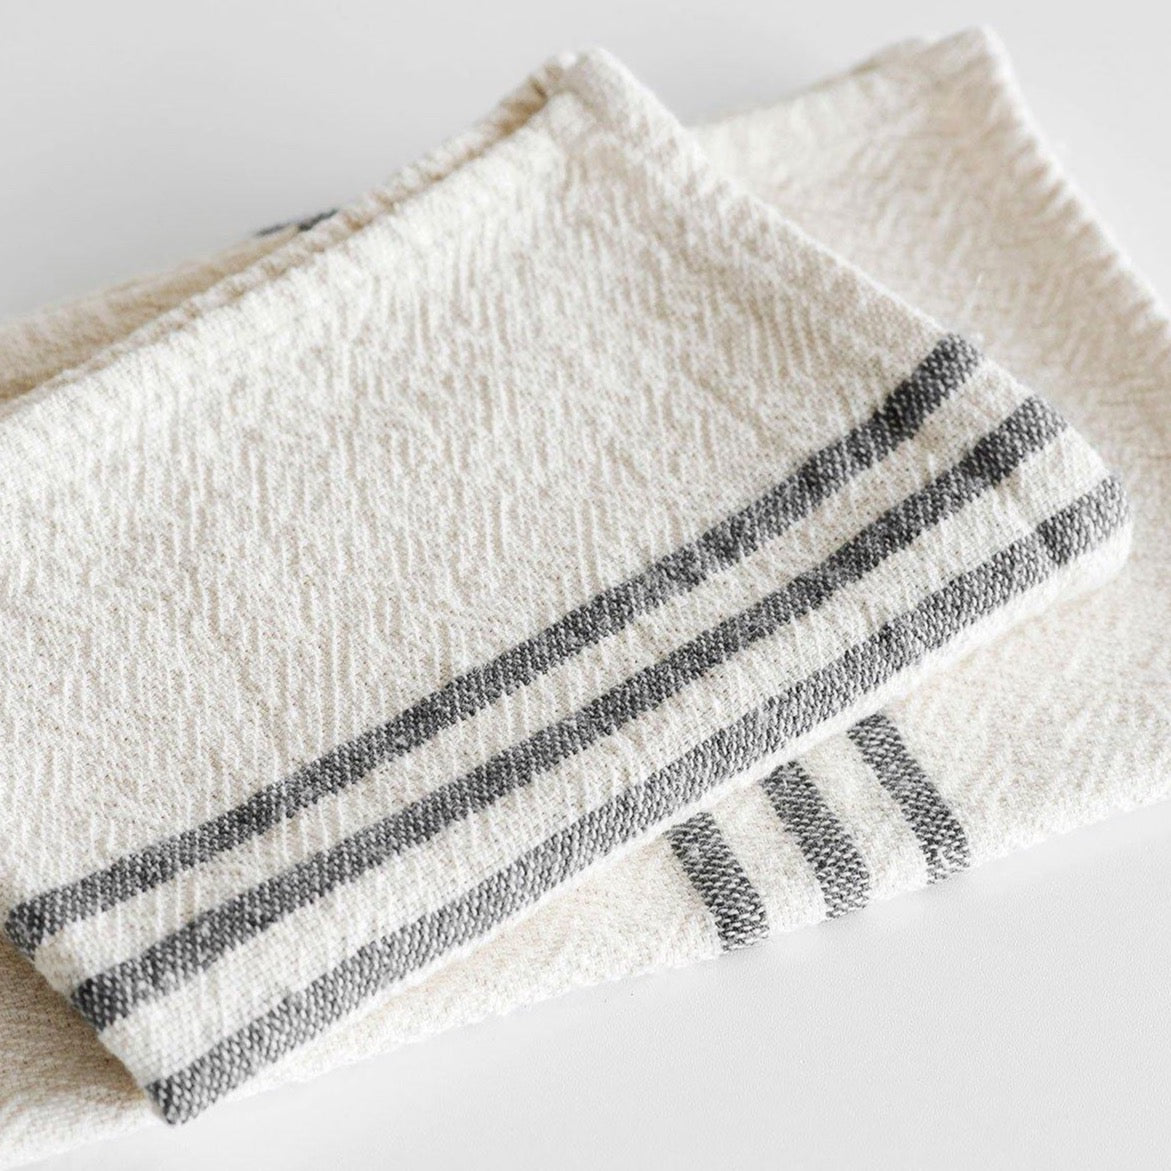 Small Country Towel - Striped Charcoal - Wildsprout